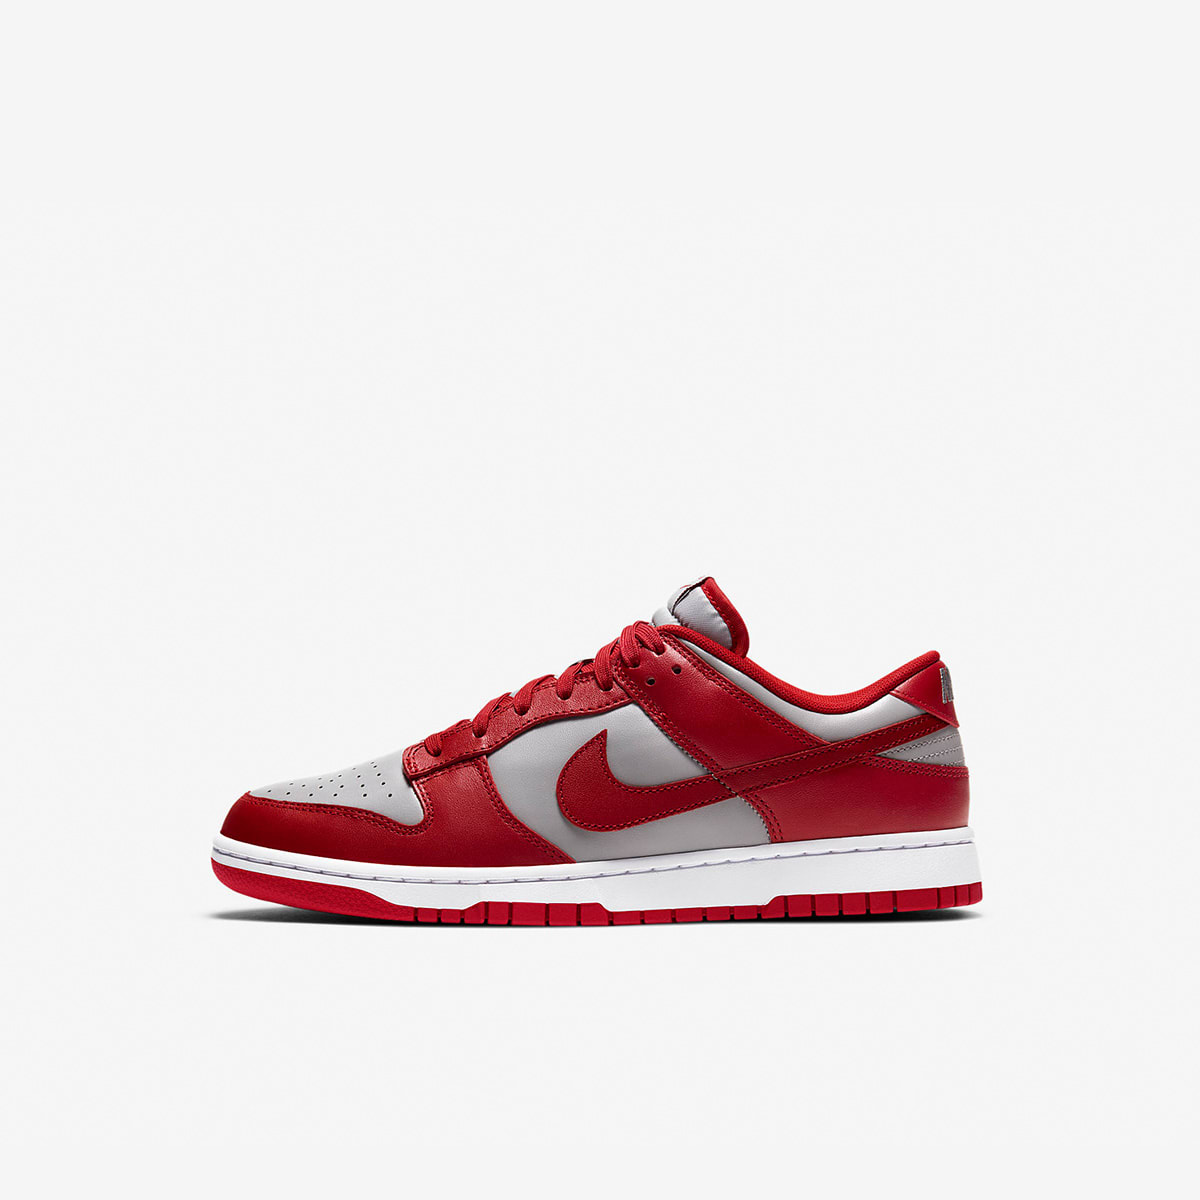 Nike Dunk Low Retro (Grey, Red & White) | END. Launches